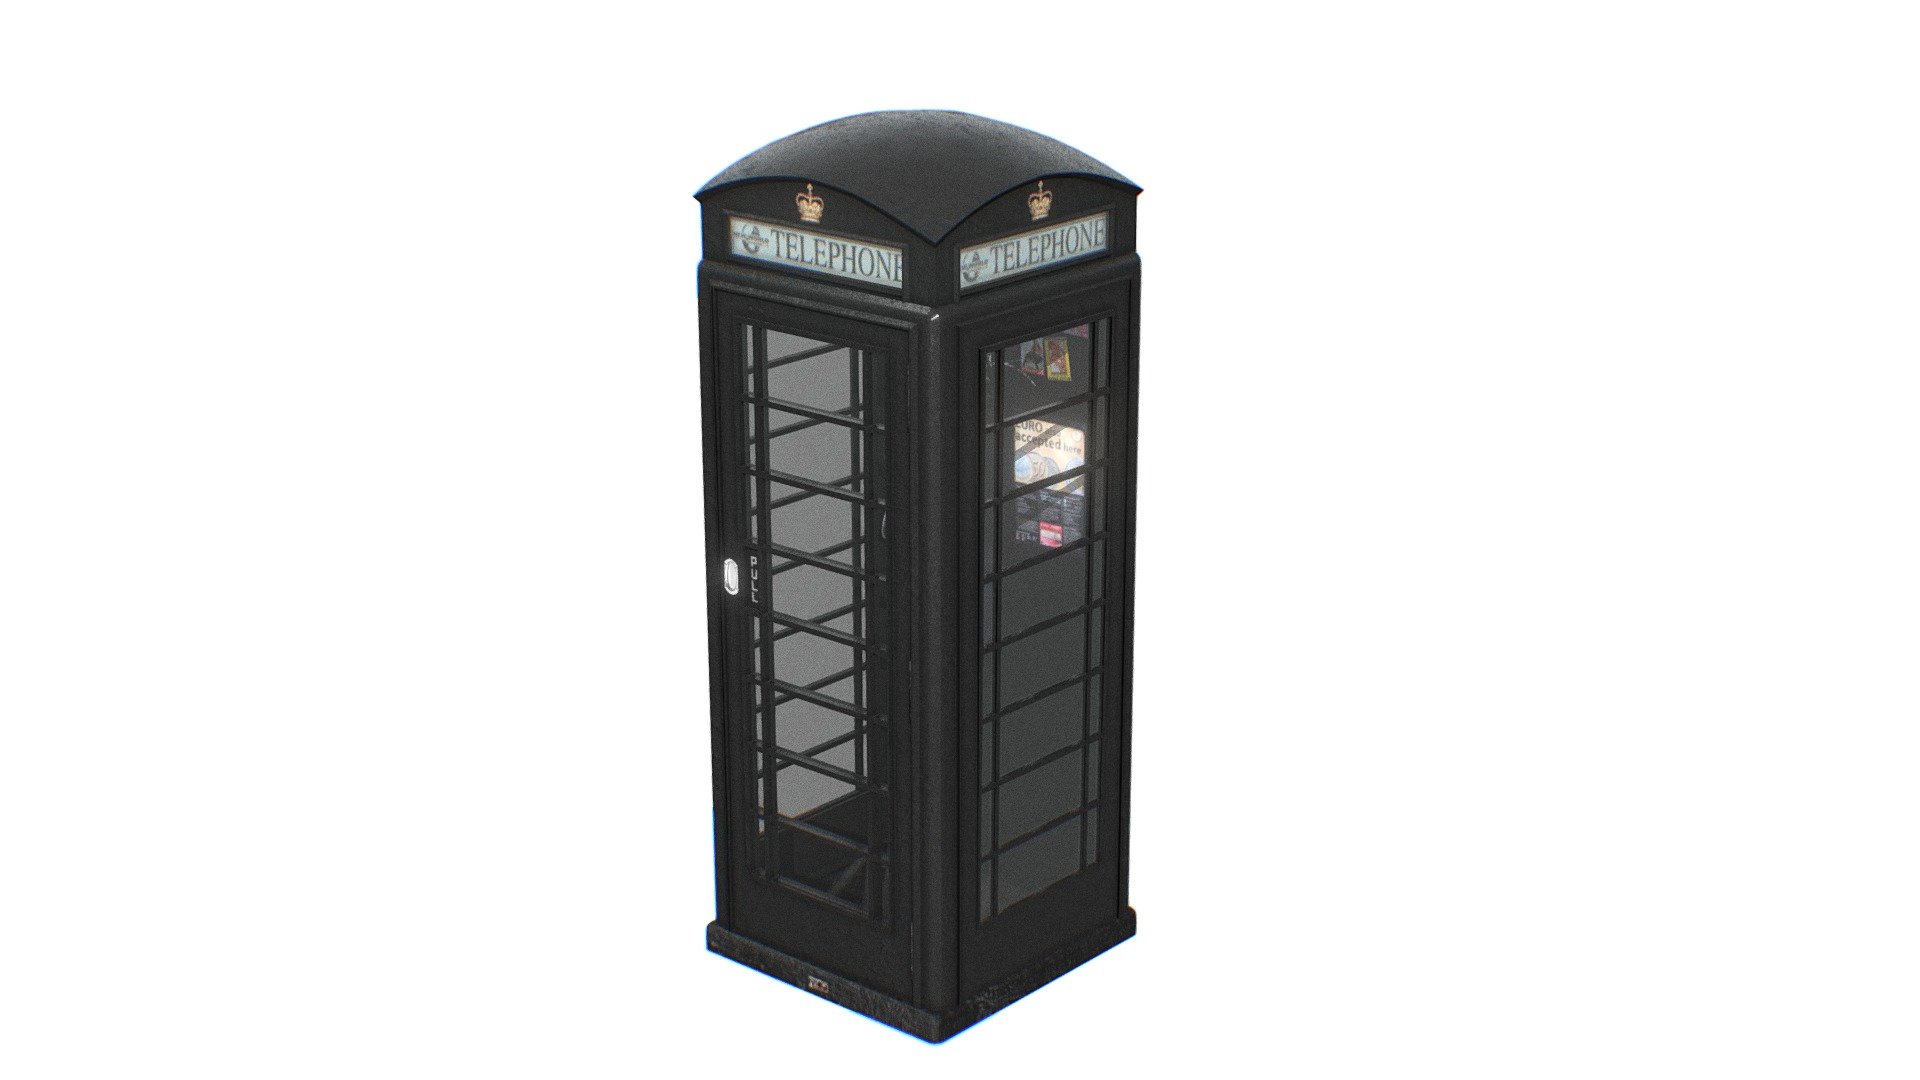 Photorealistic The red telephone box, a public english telephone kiosk.

English K6 telephone booth designed in 1935 has become a British icon 3d model